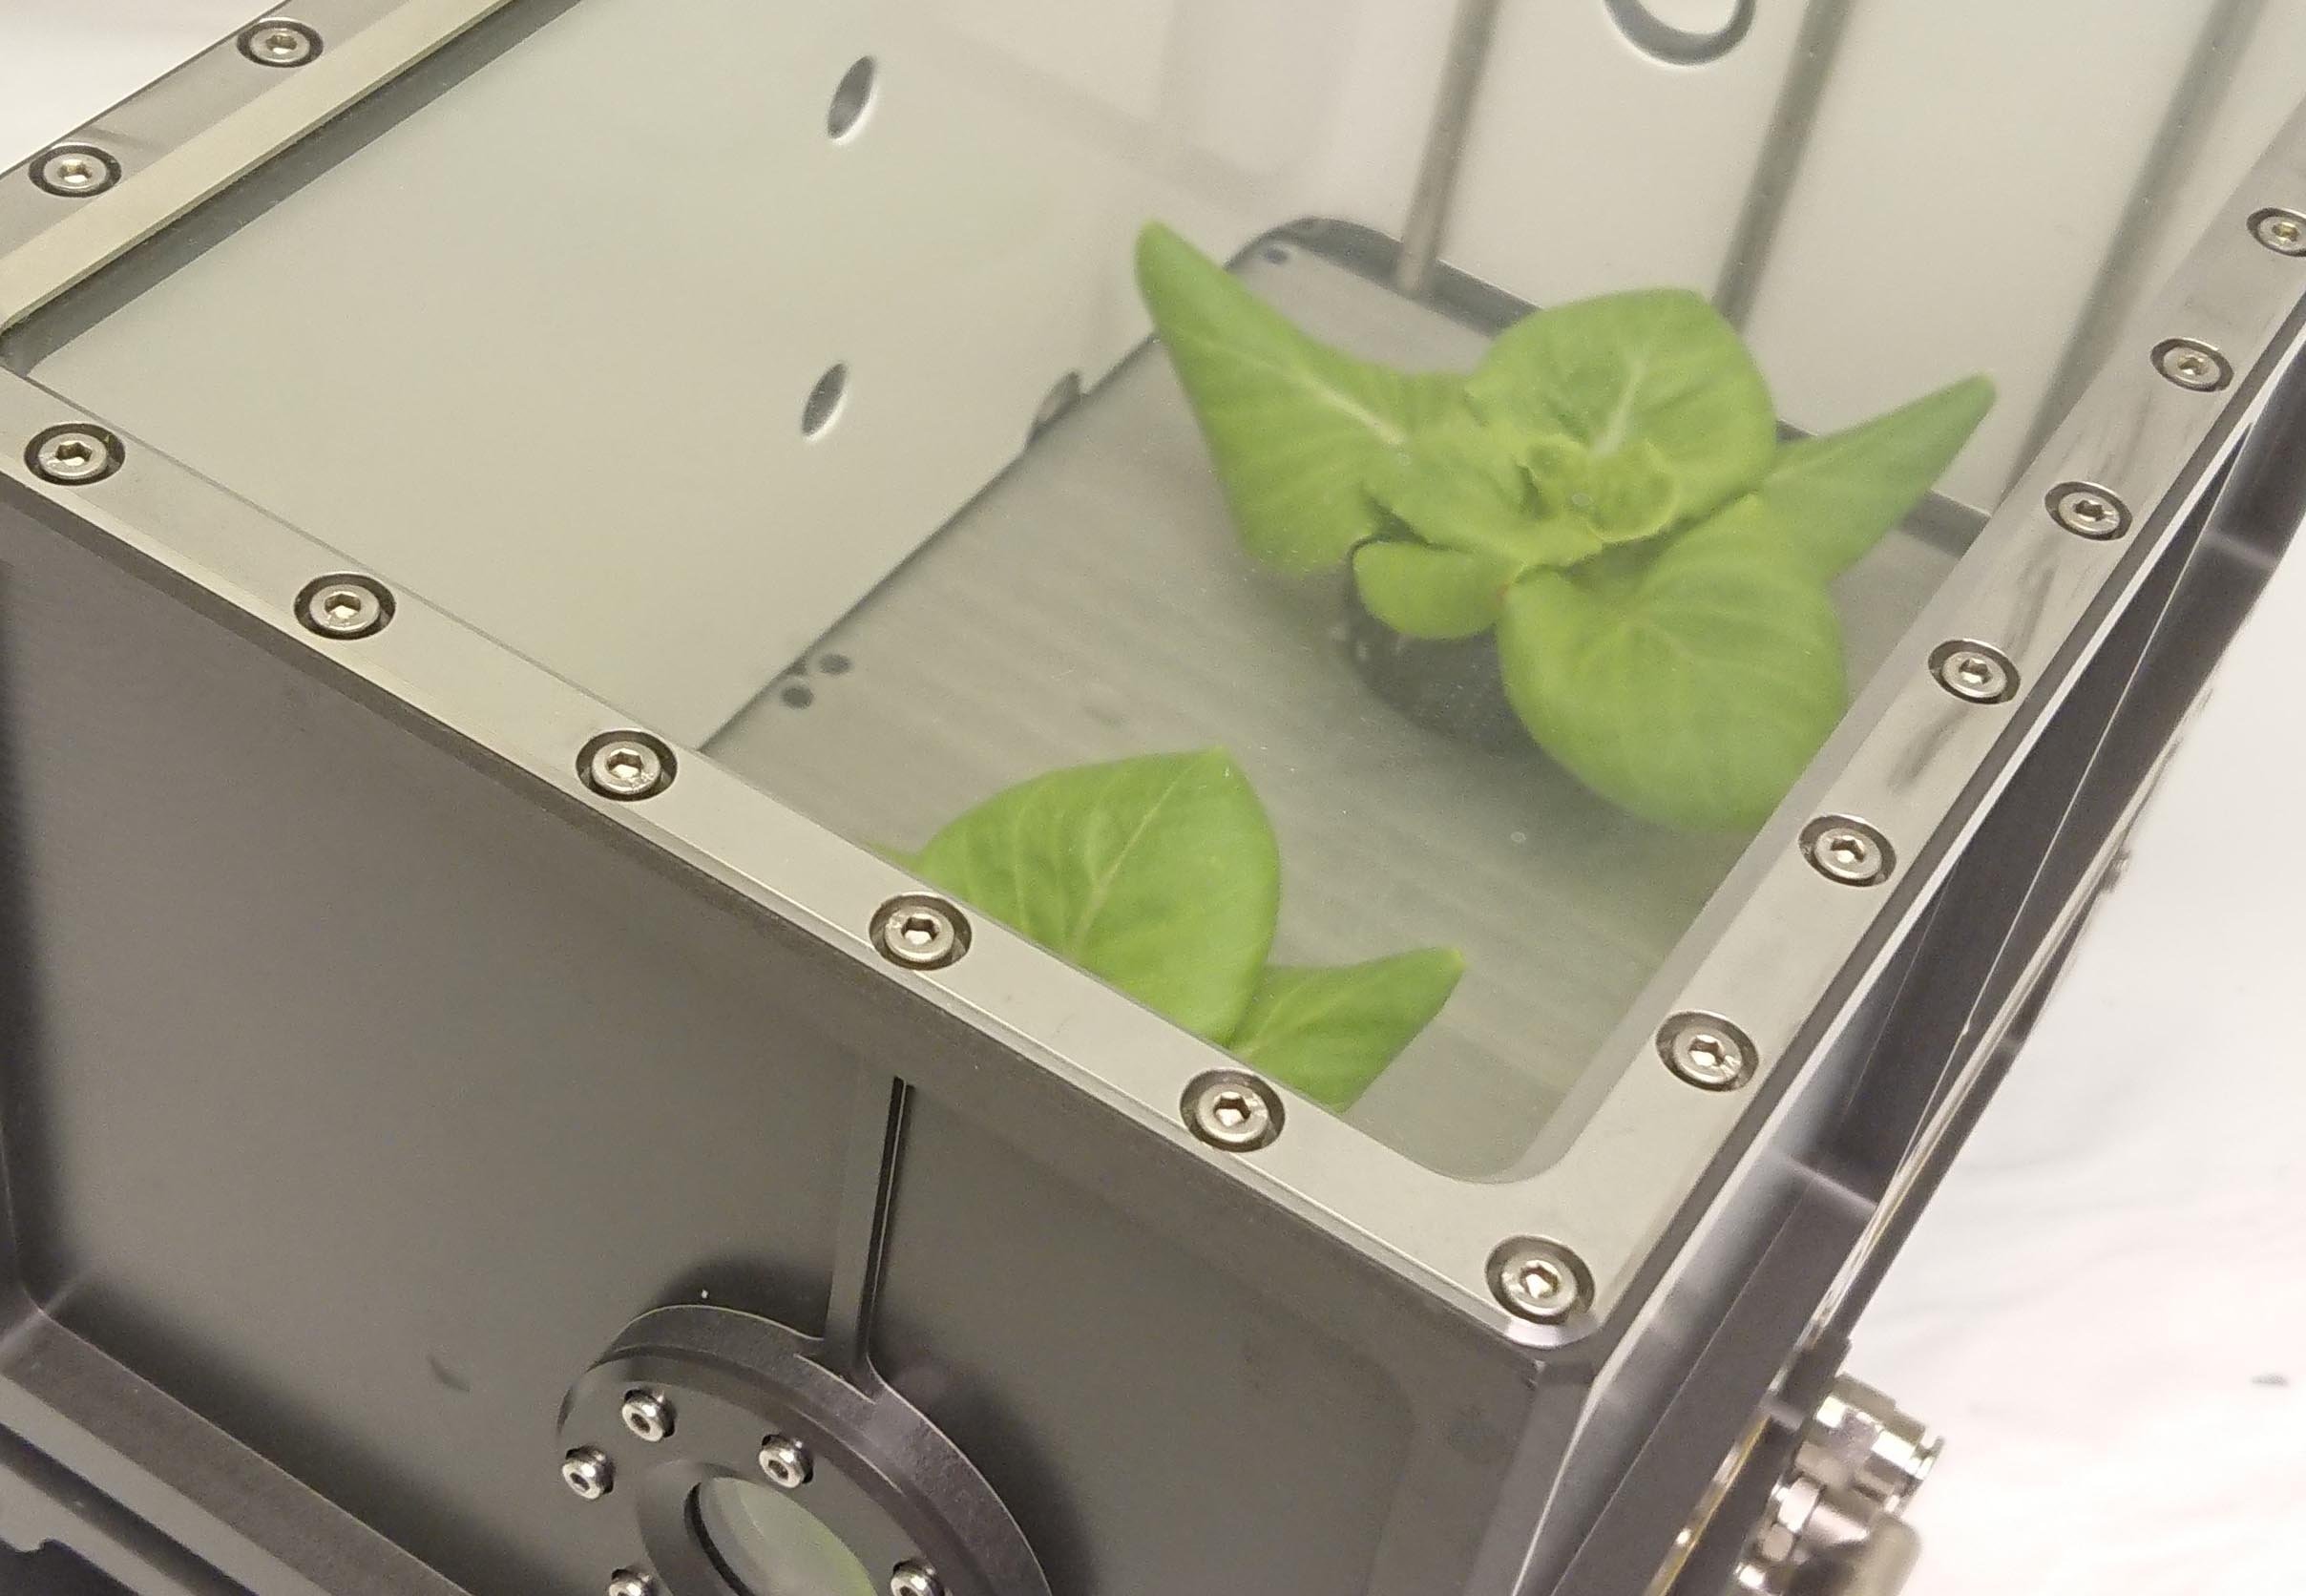 The prototype space greenhouse developed by the TIME SCALE project showed that it is possible to recycle nutrients and water to grow food. Image credit - Karoliussen